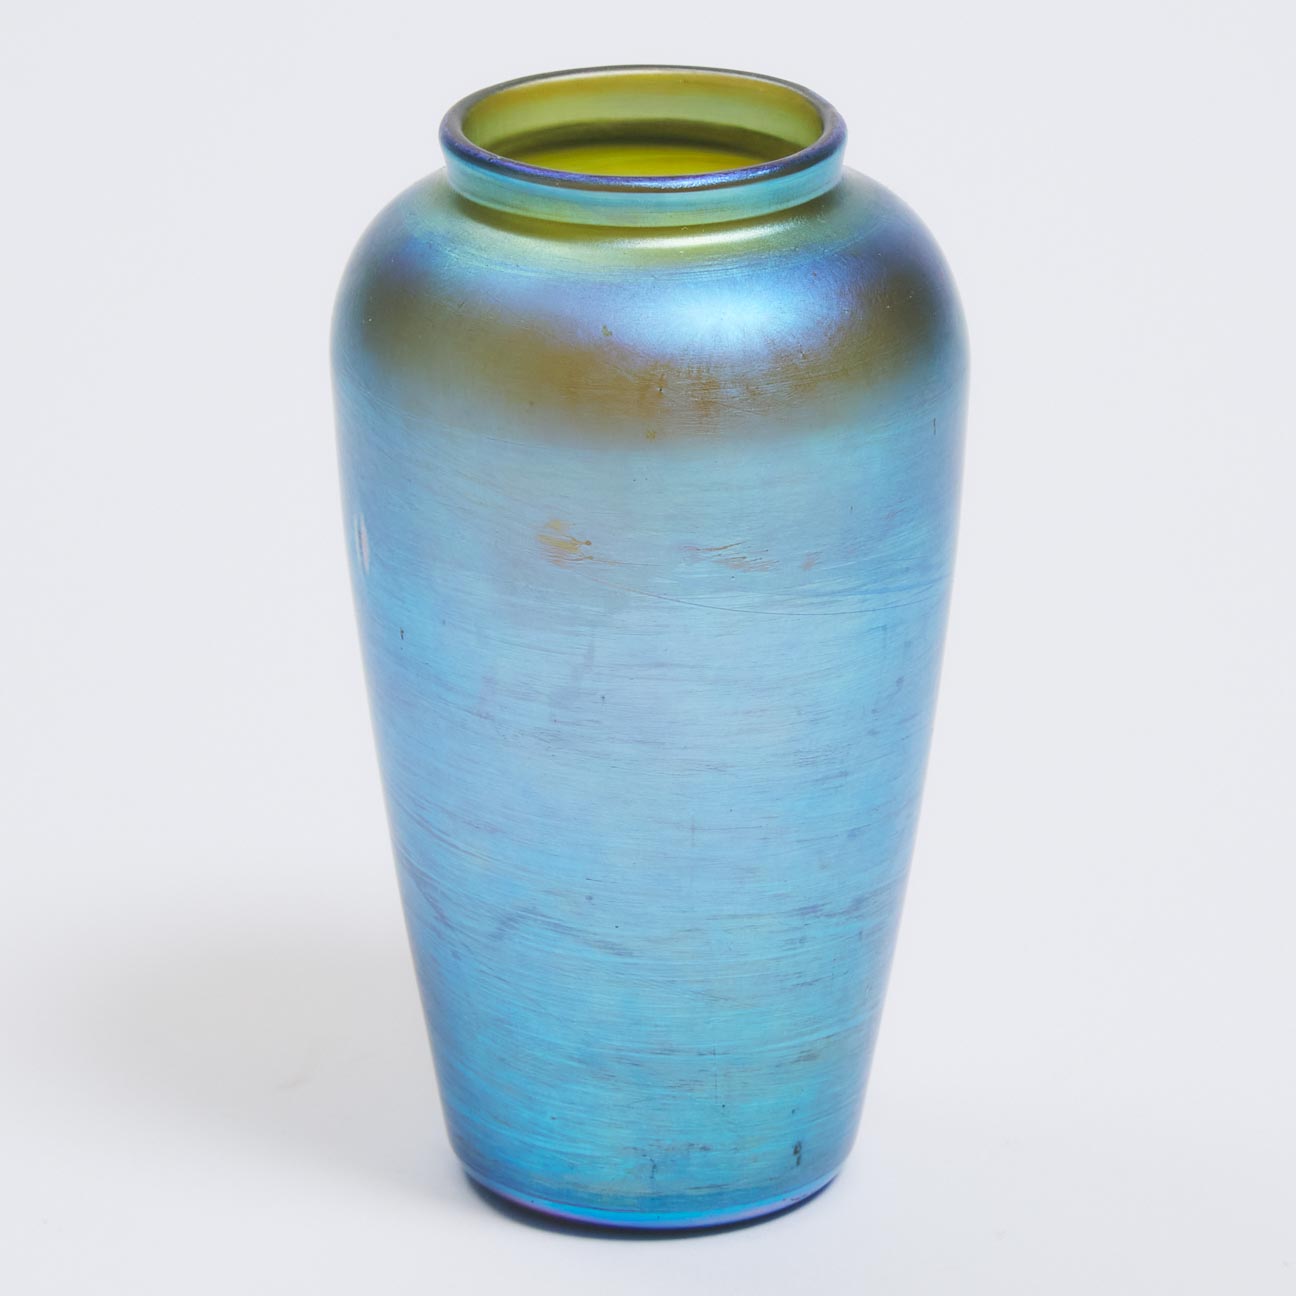 Small Quezal Iridescent Blue Glass Vase, early 20th century